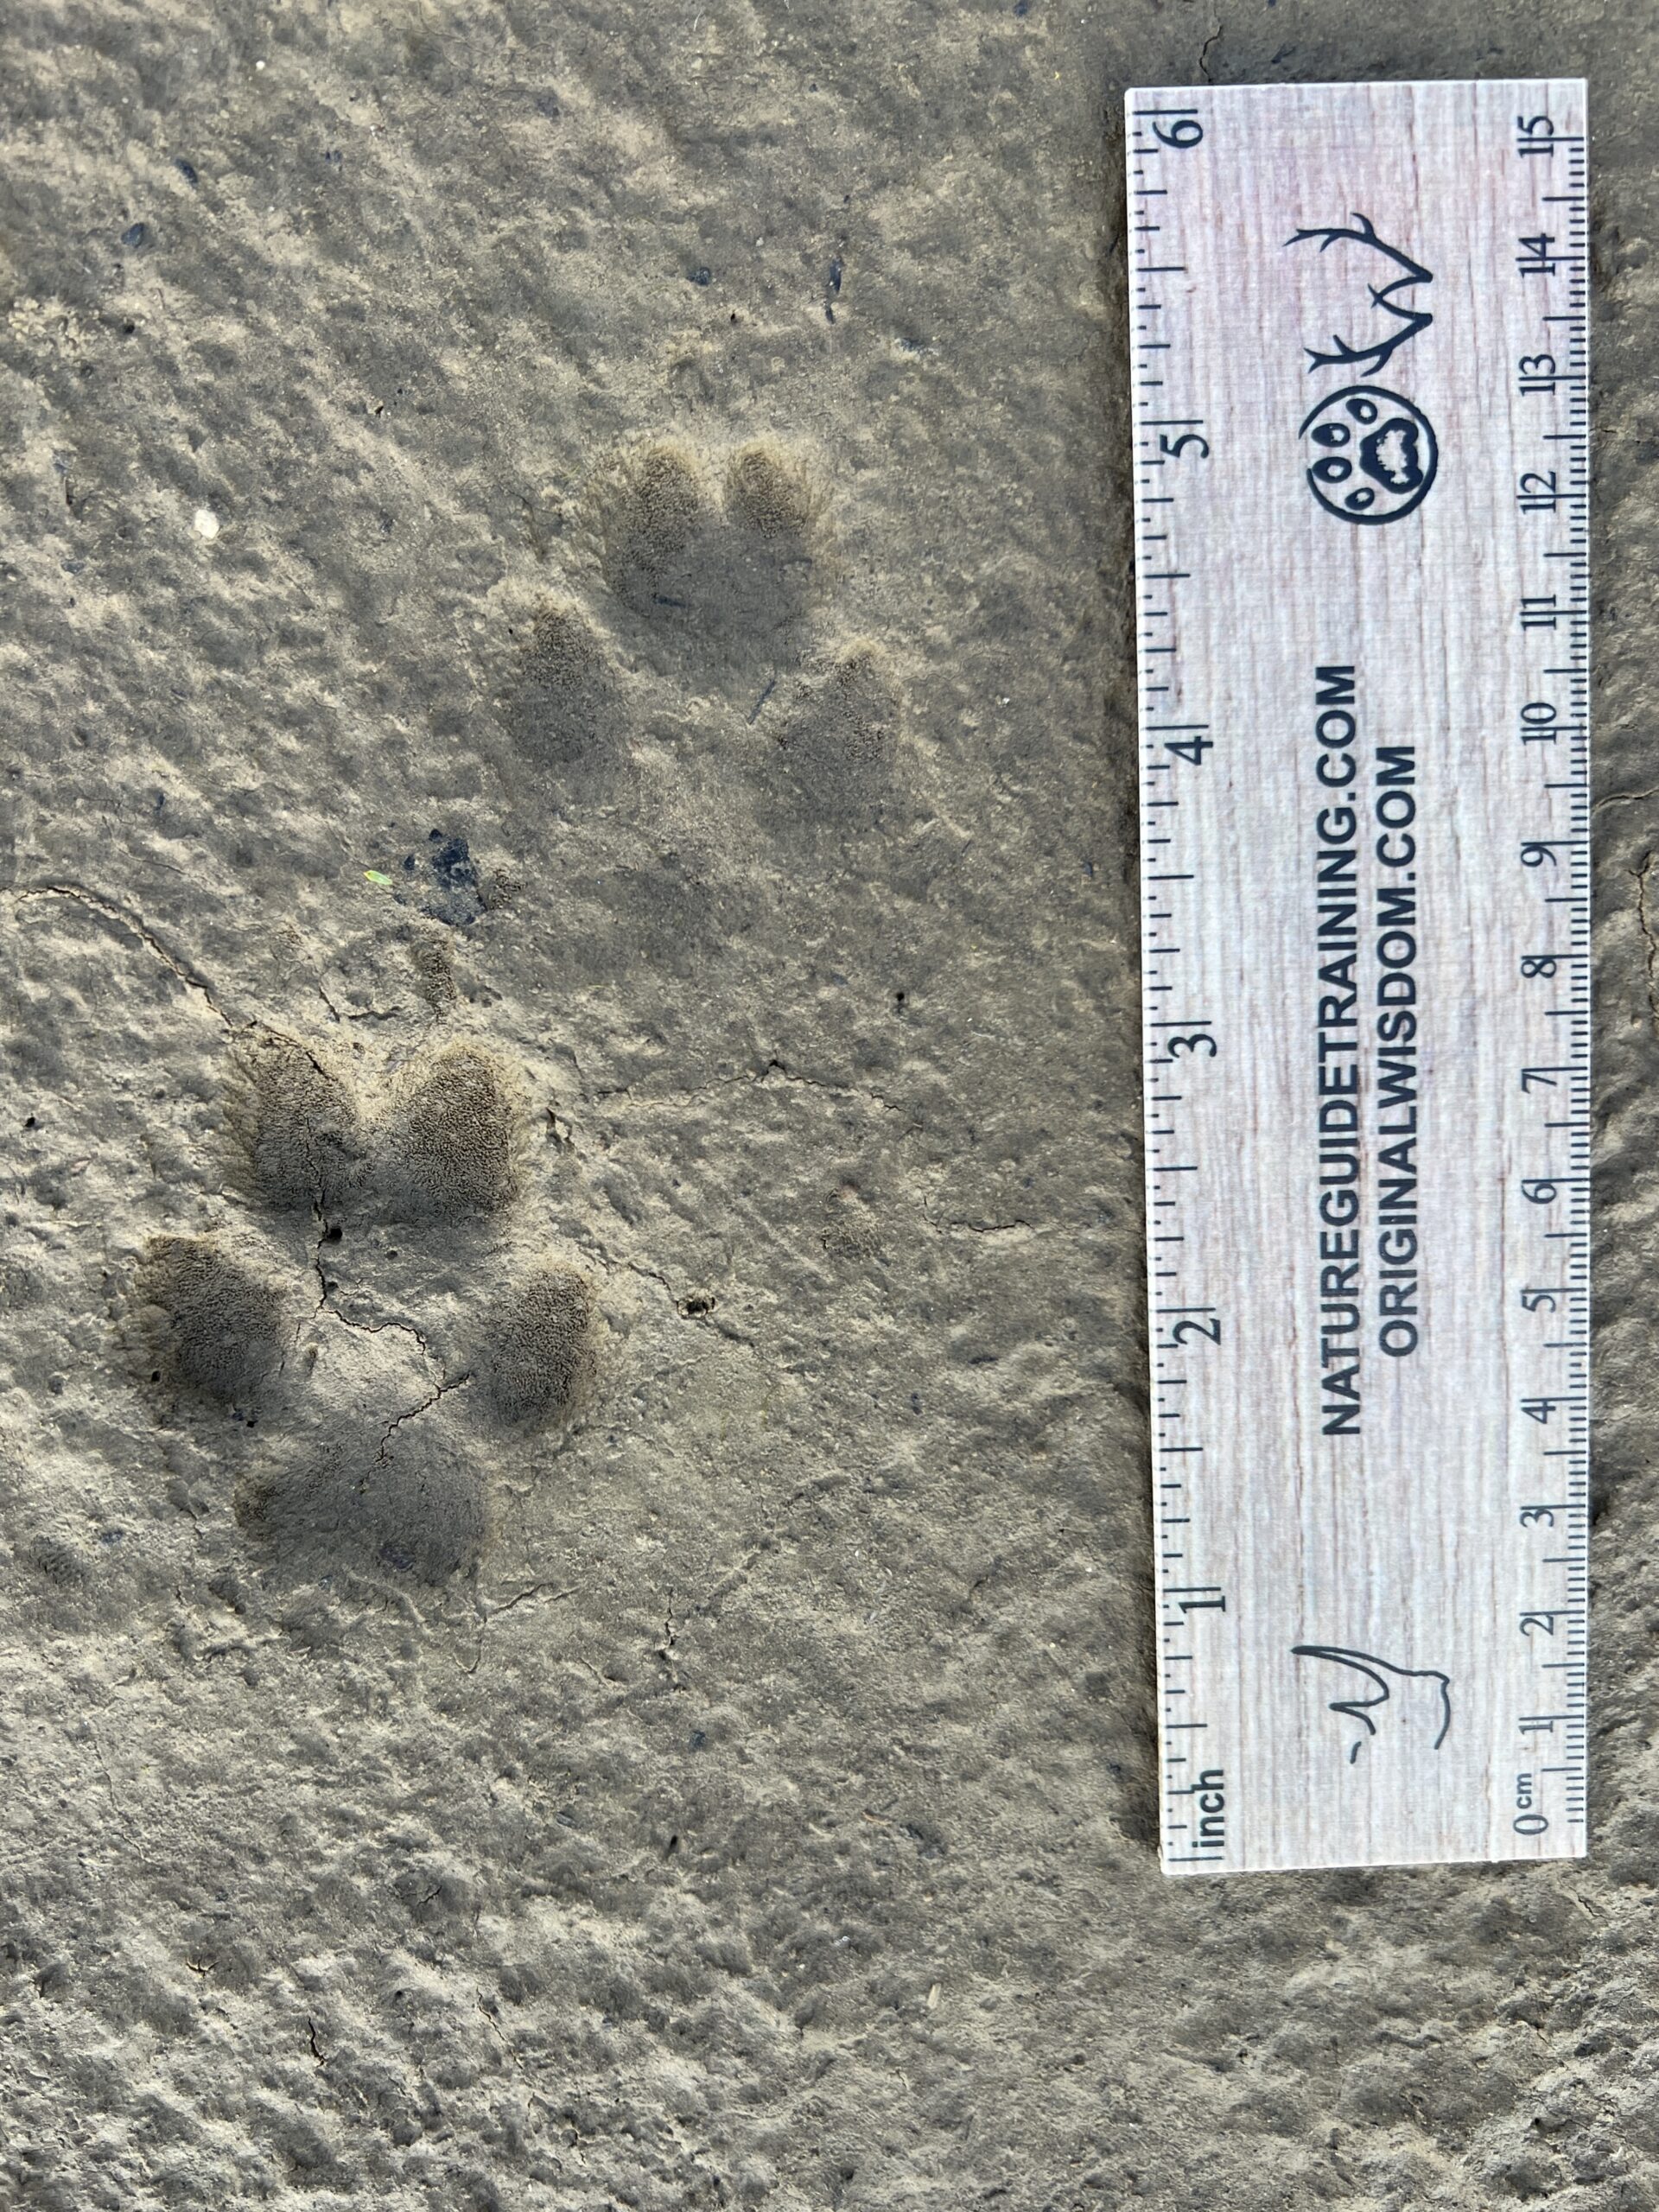 red fox tracks, front above and hind below